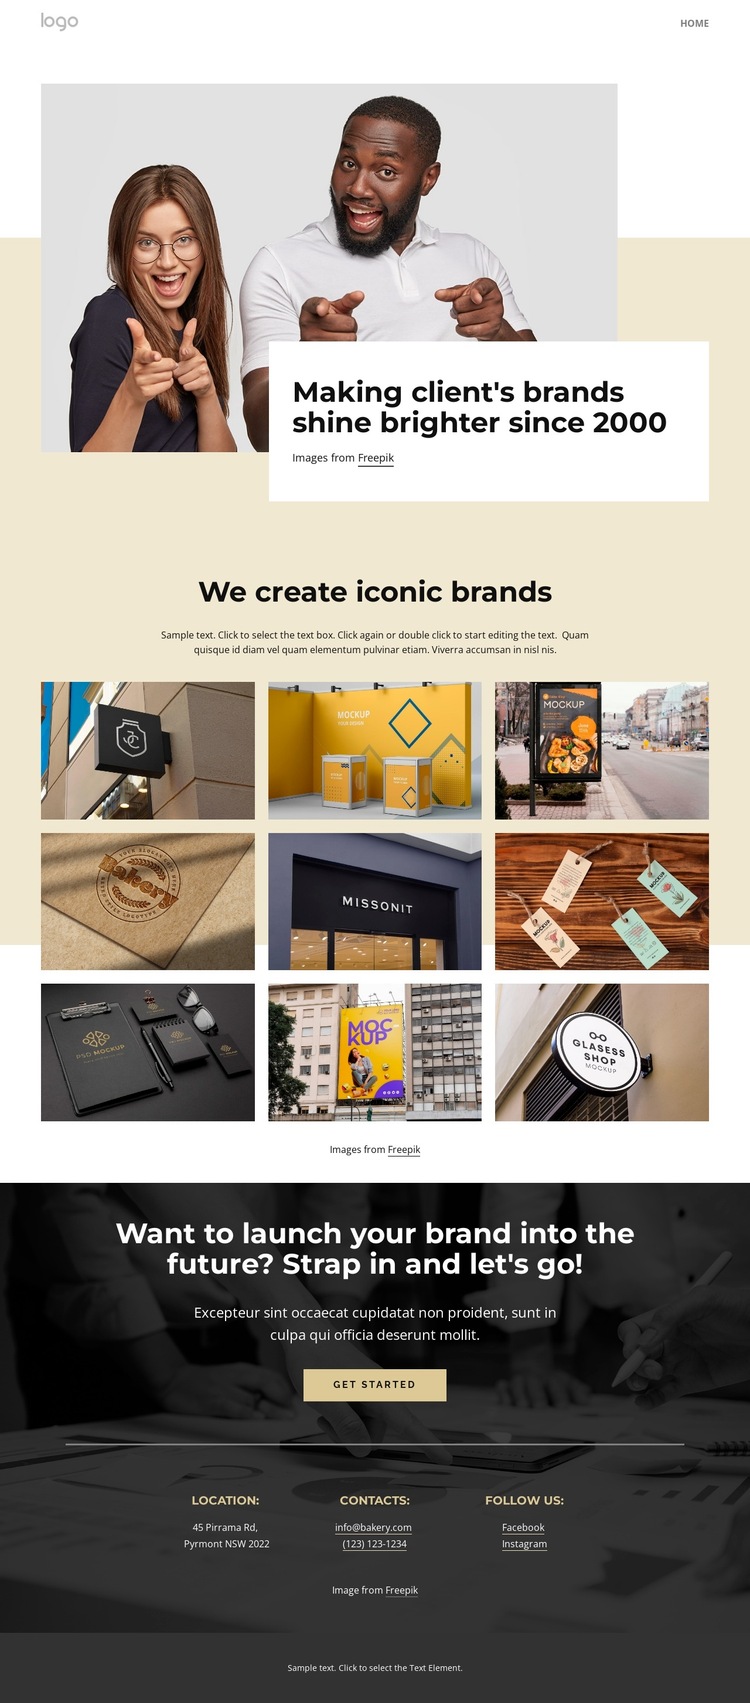 We create iconic brands HTML5 Template